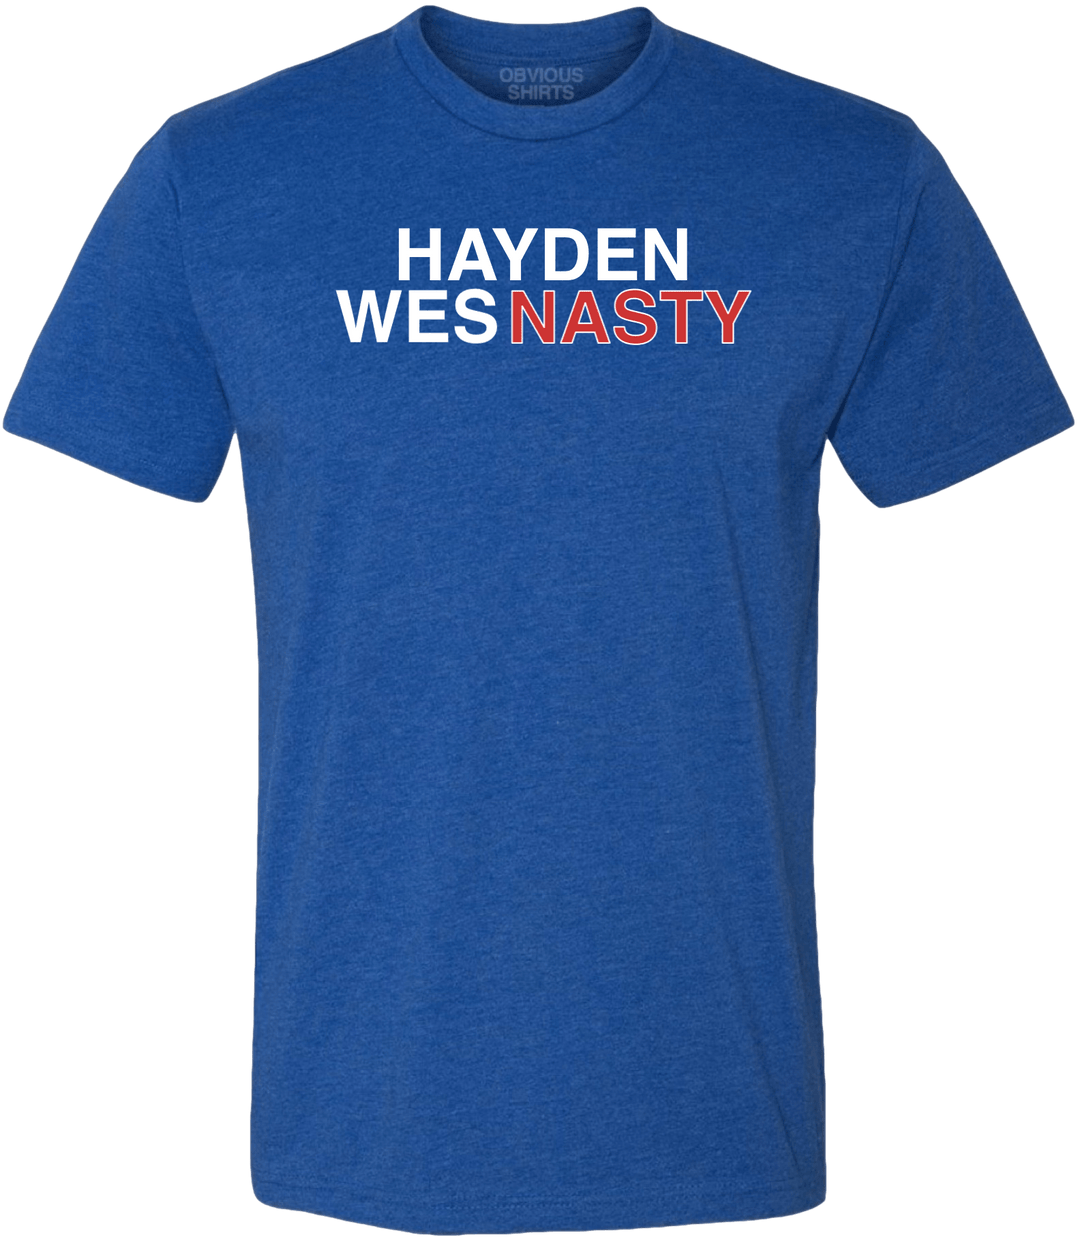 HAYDEN WESNASTY - OBVIOUS SHIRTS